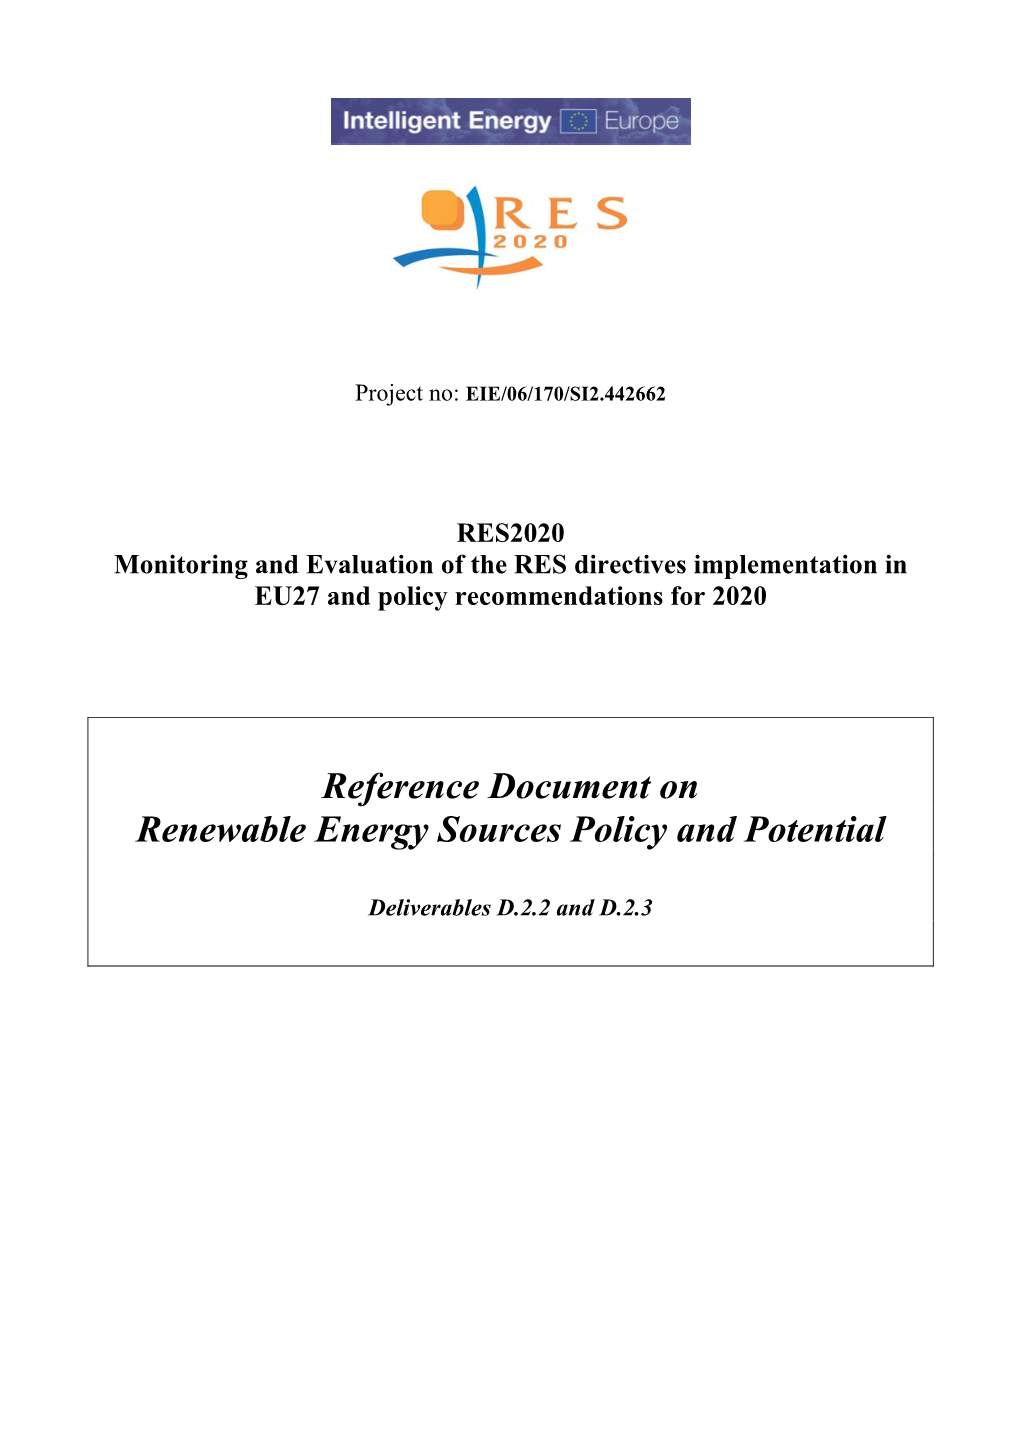 Reference Document on Renewable Energy Sources Policy and Potential